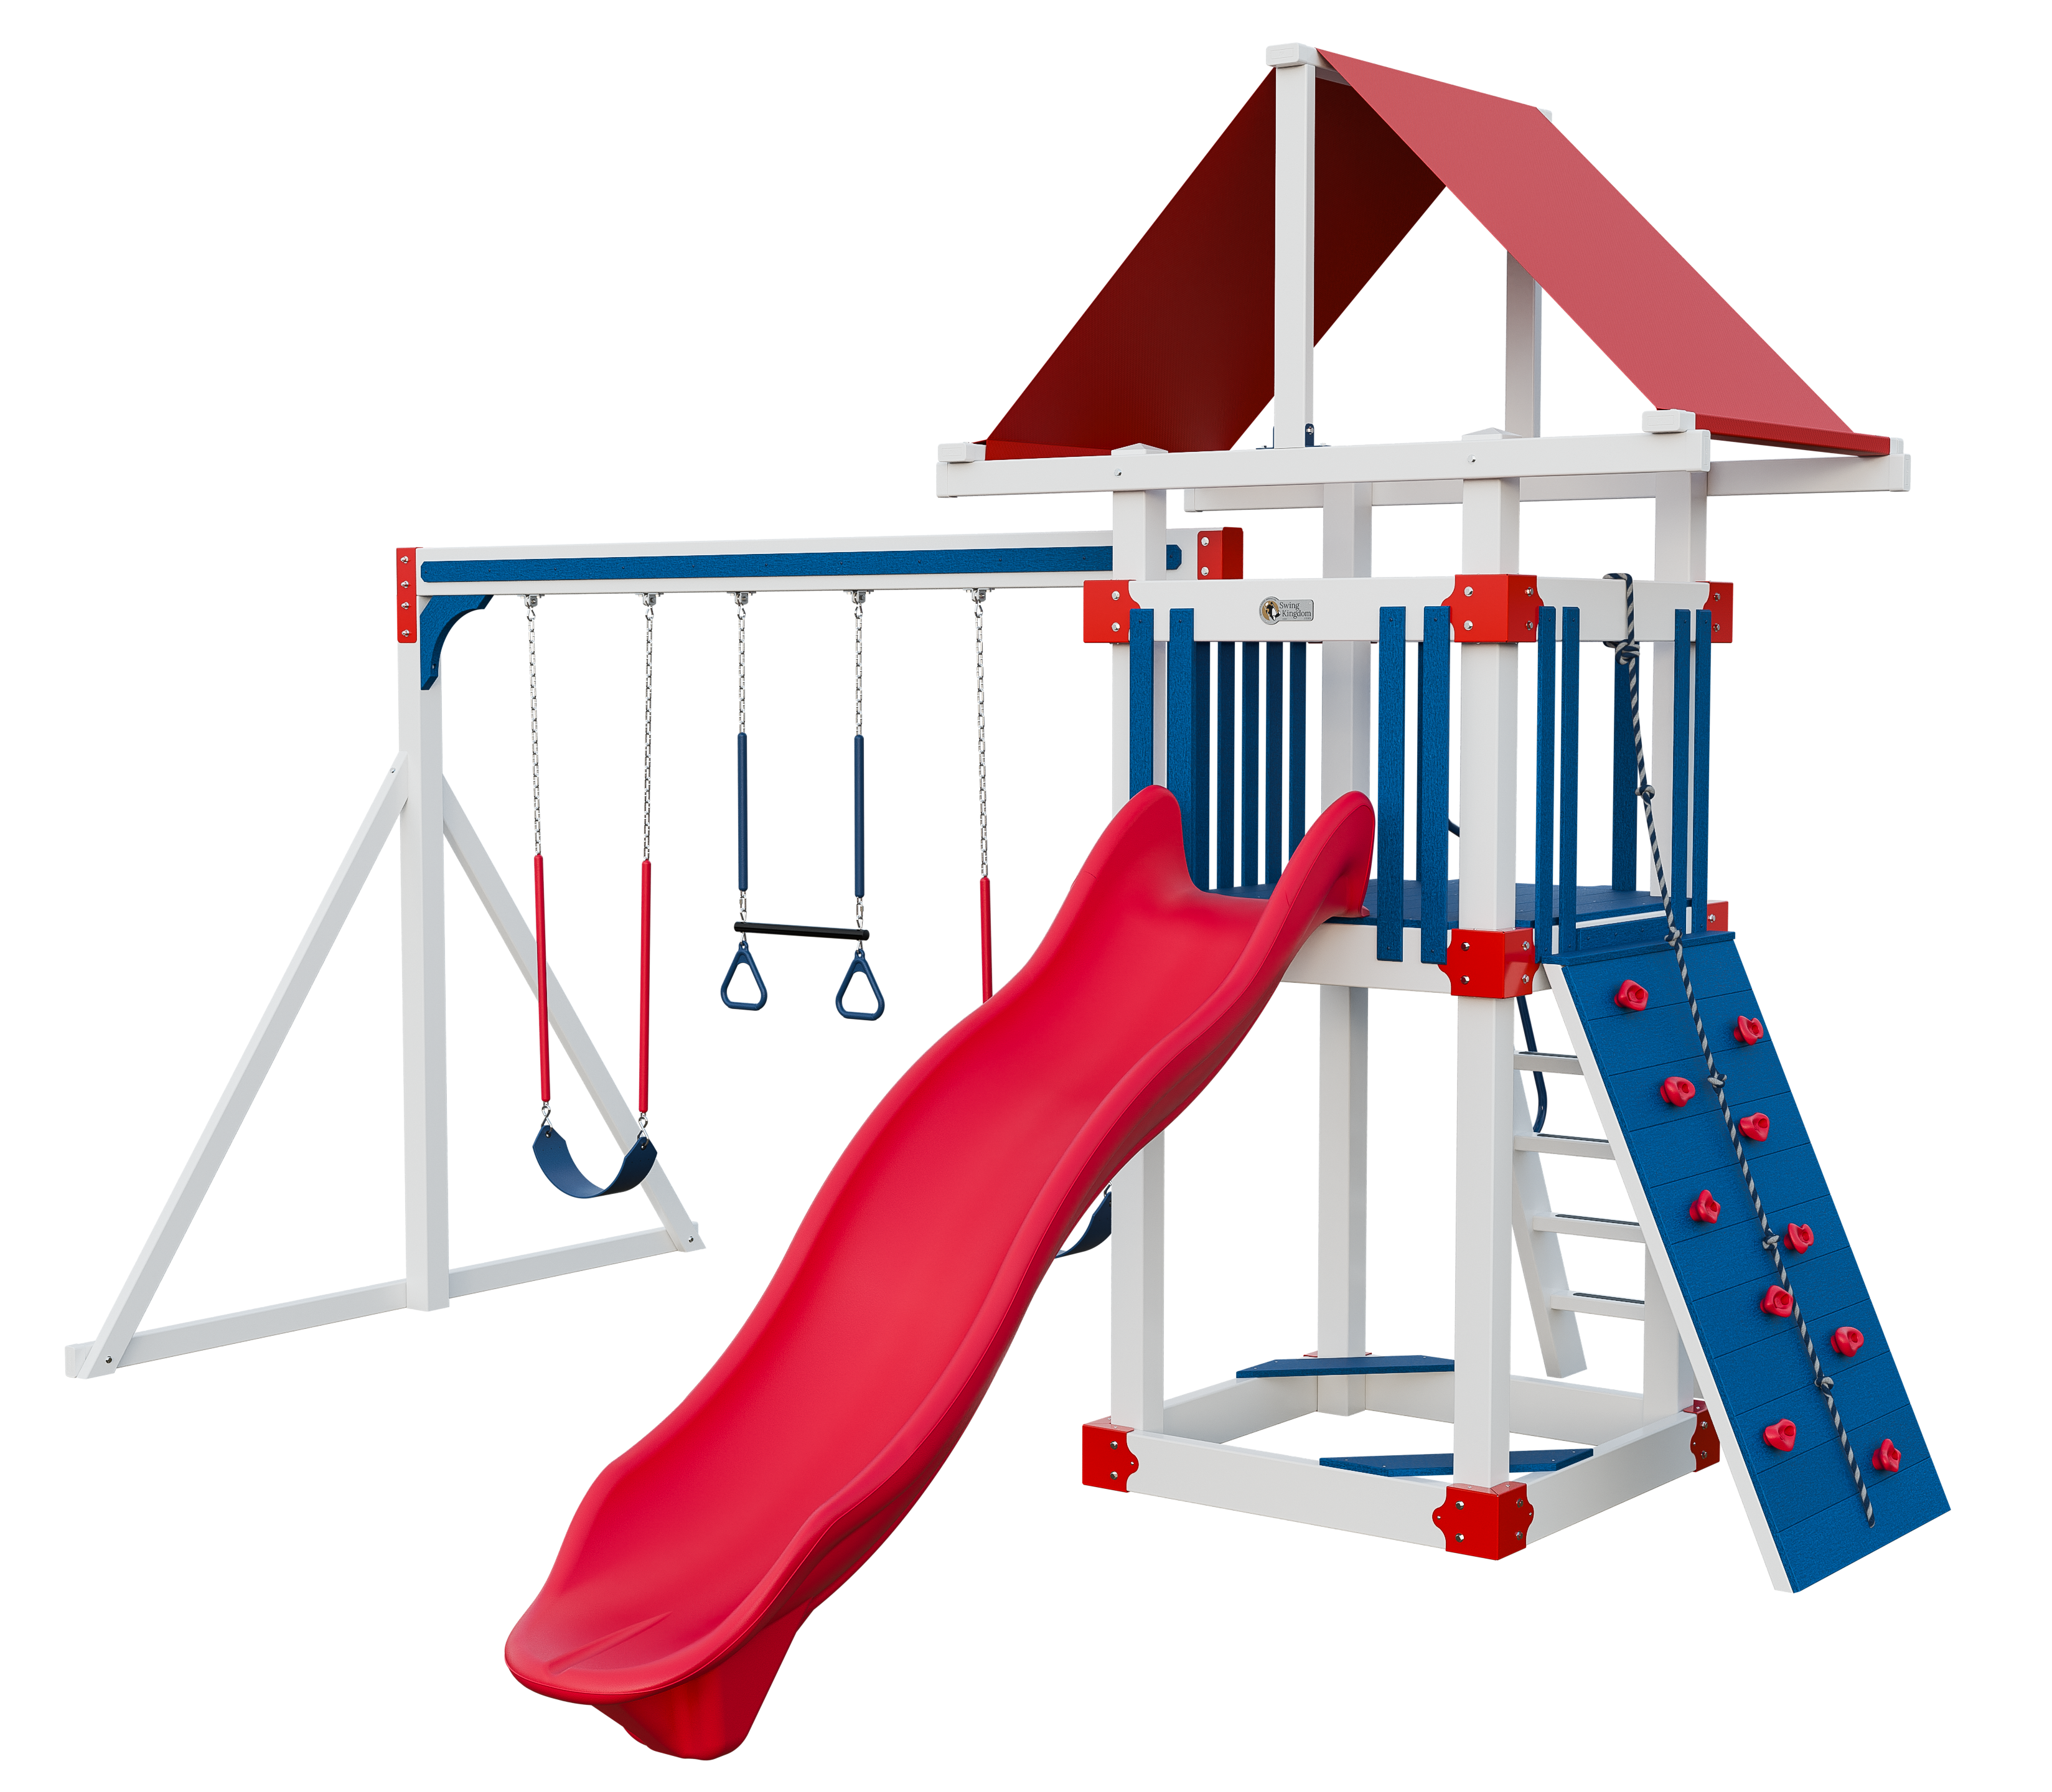 3D Playset Builder Preview